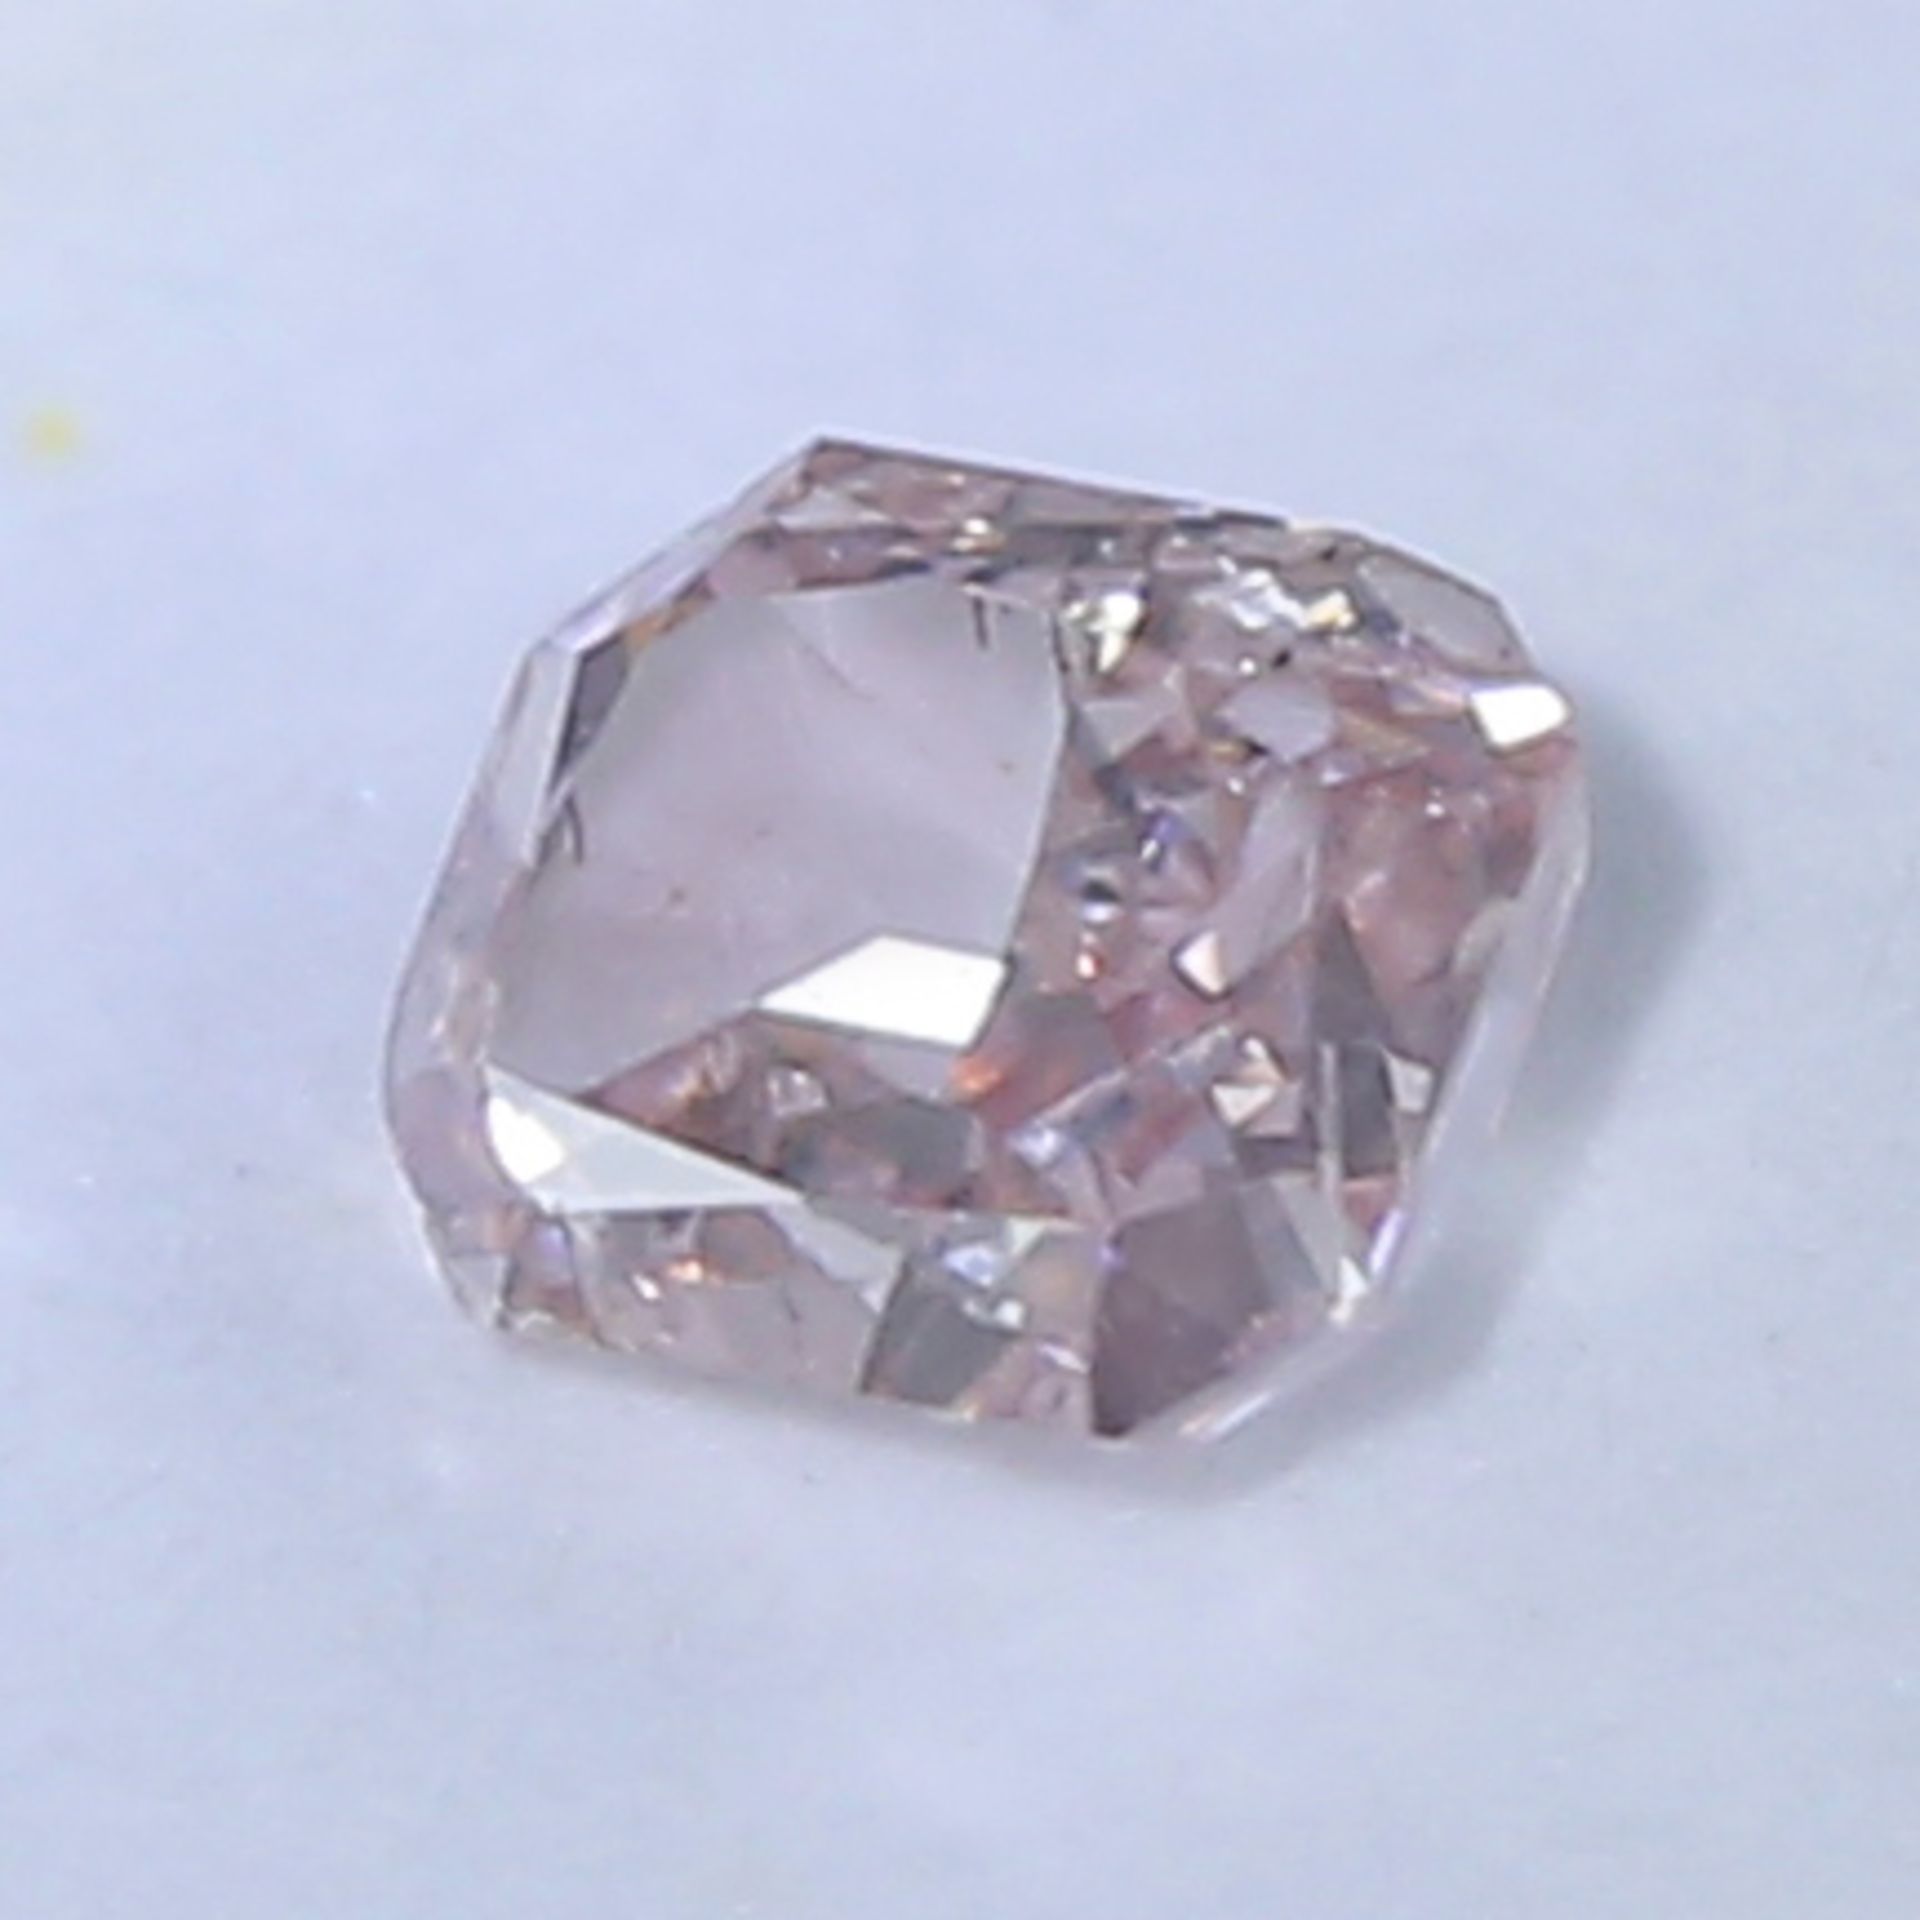 GIA Certified 0.08 ct. Fancy Orangy Pink Diamond - Image 6 of 10